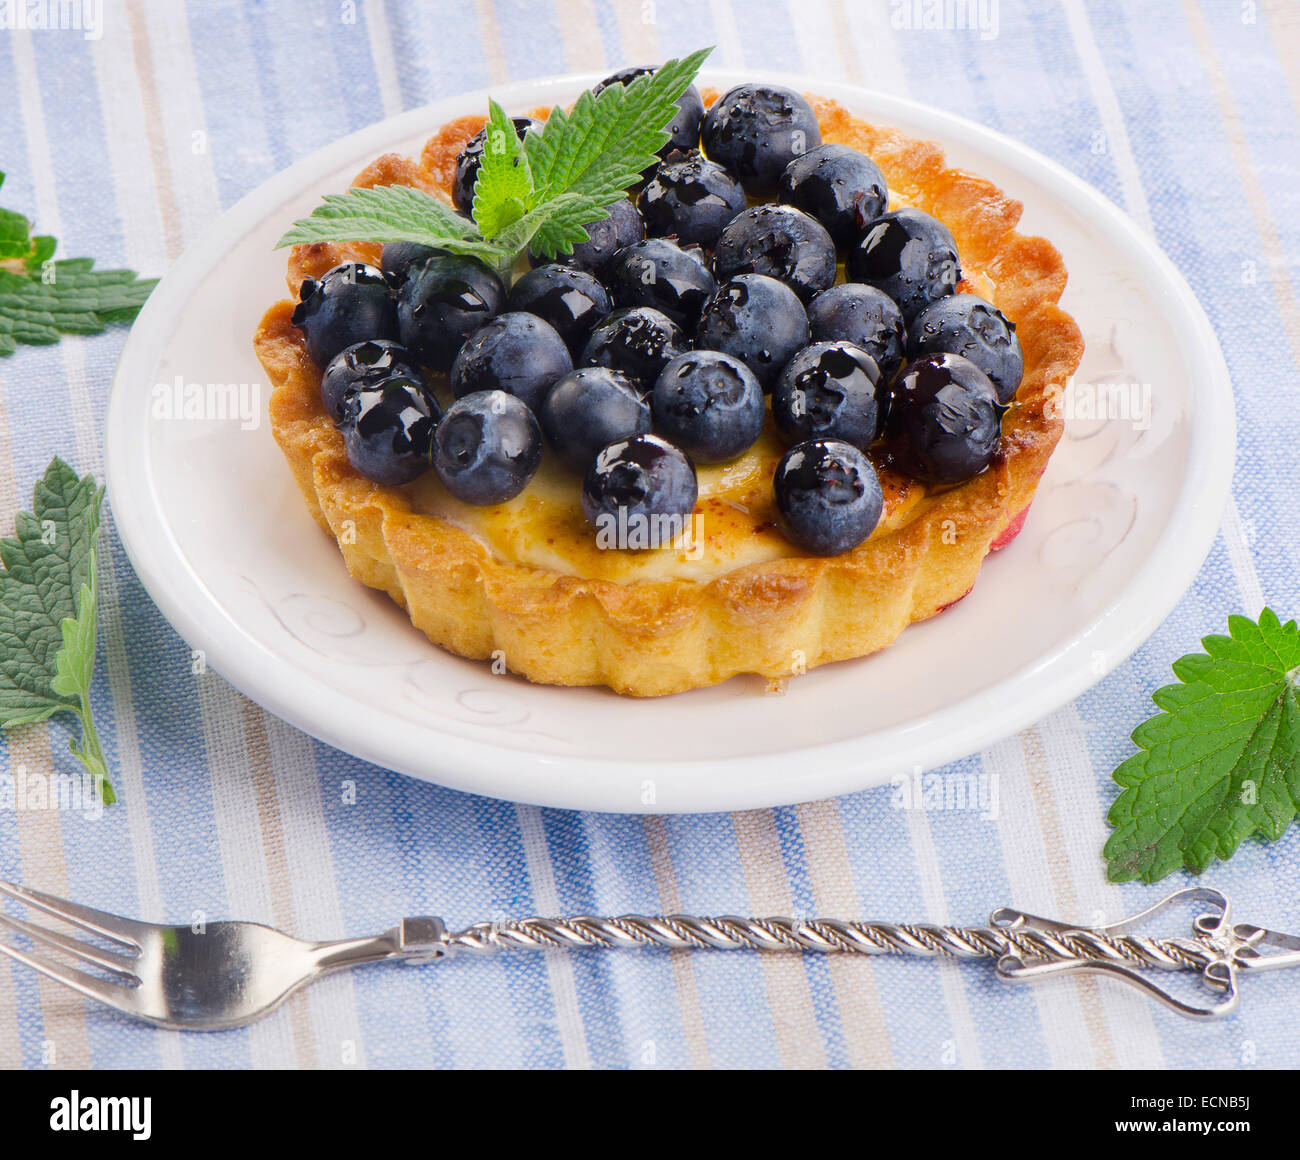 Blueberry tart on a white plate. Selective focus Stock Photo